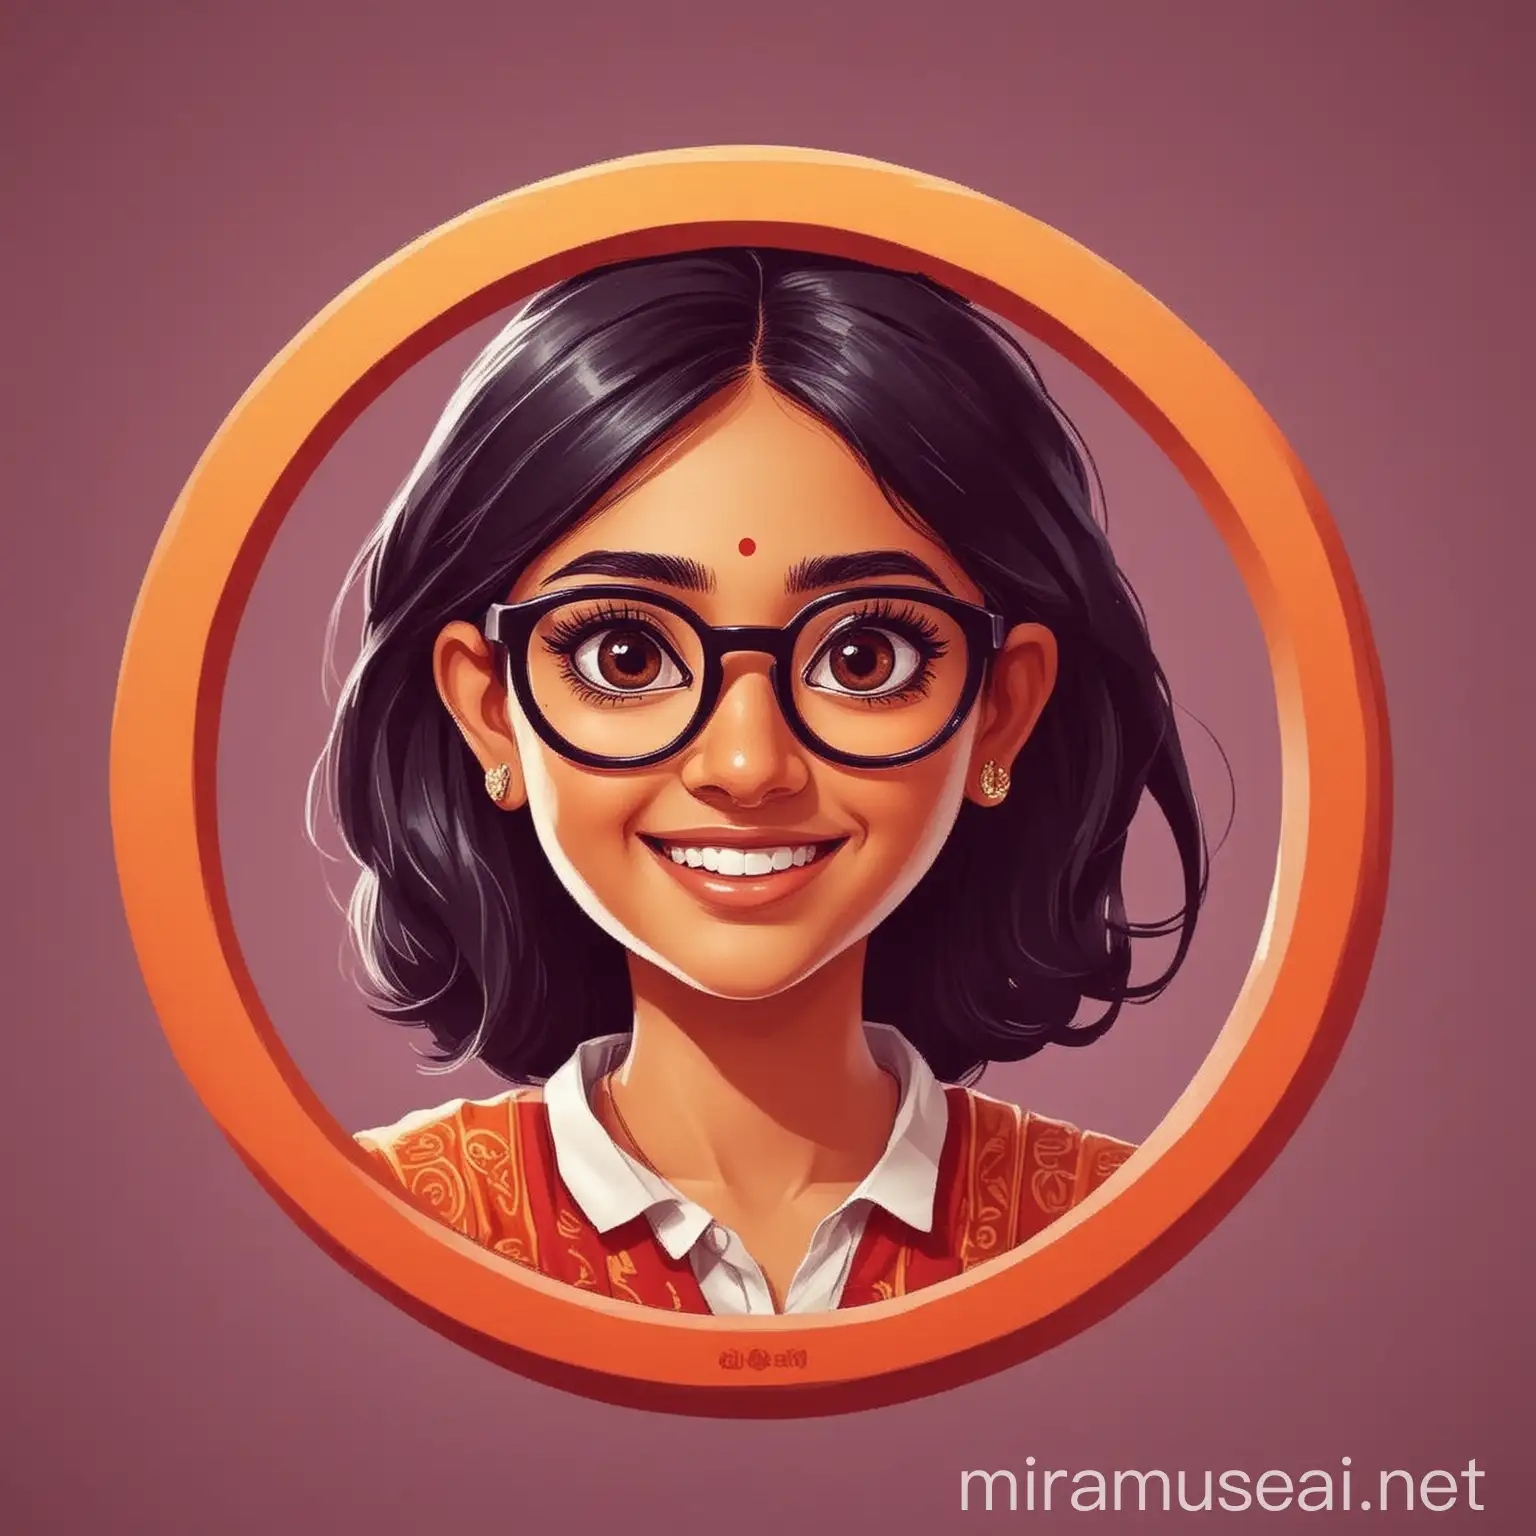 AKIA Logo Smiling Indian Girl with Spectacles in Vector Art